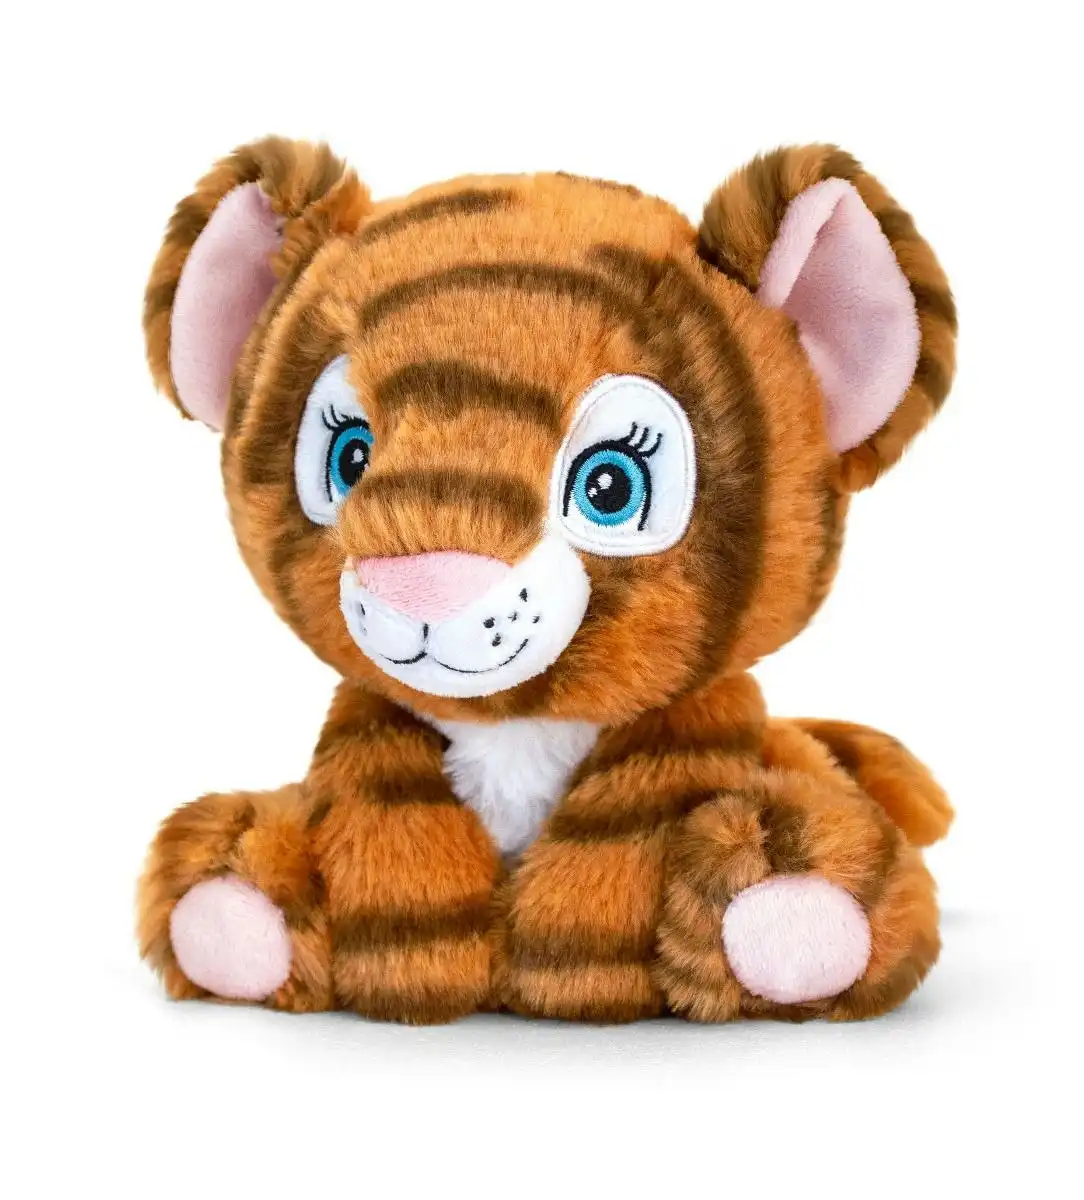 Adoptable World - Plush Tiger Gold by Keeleco 16cm